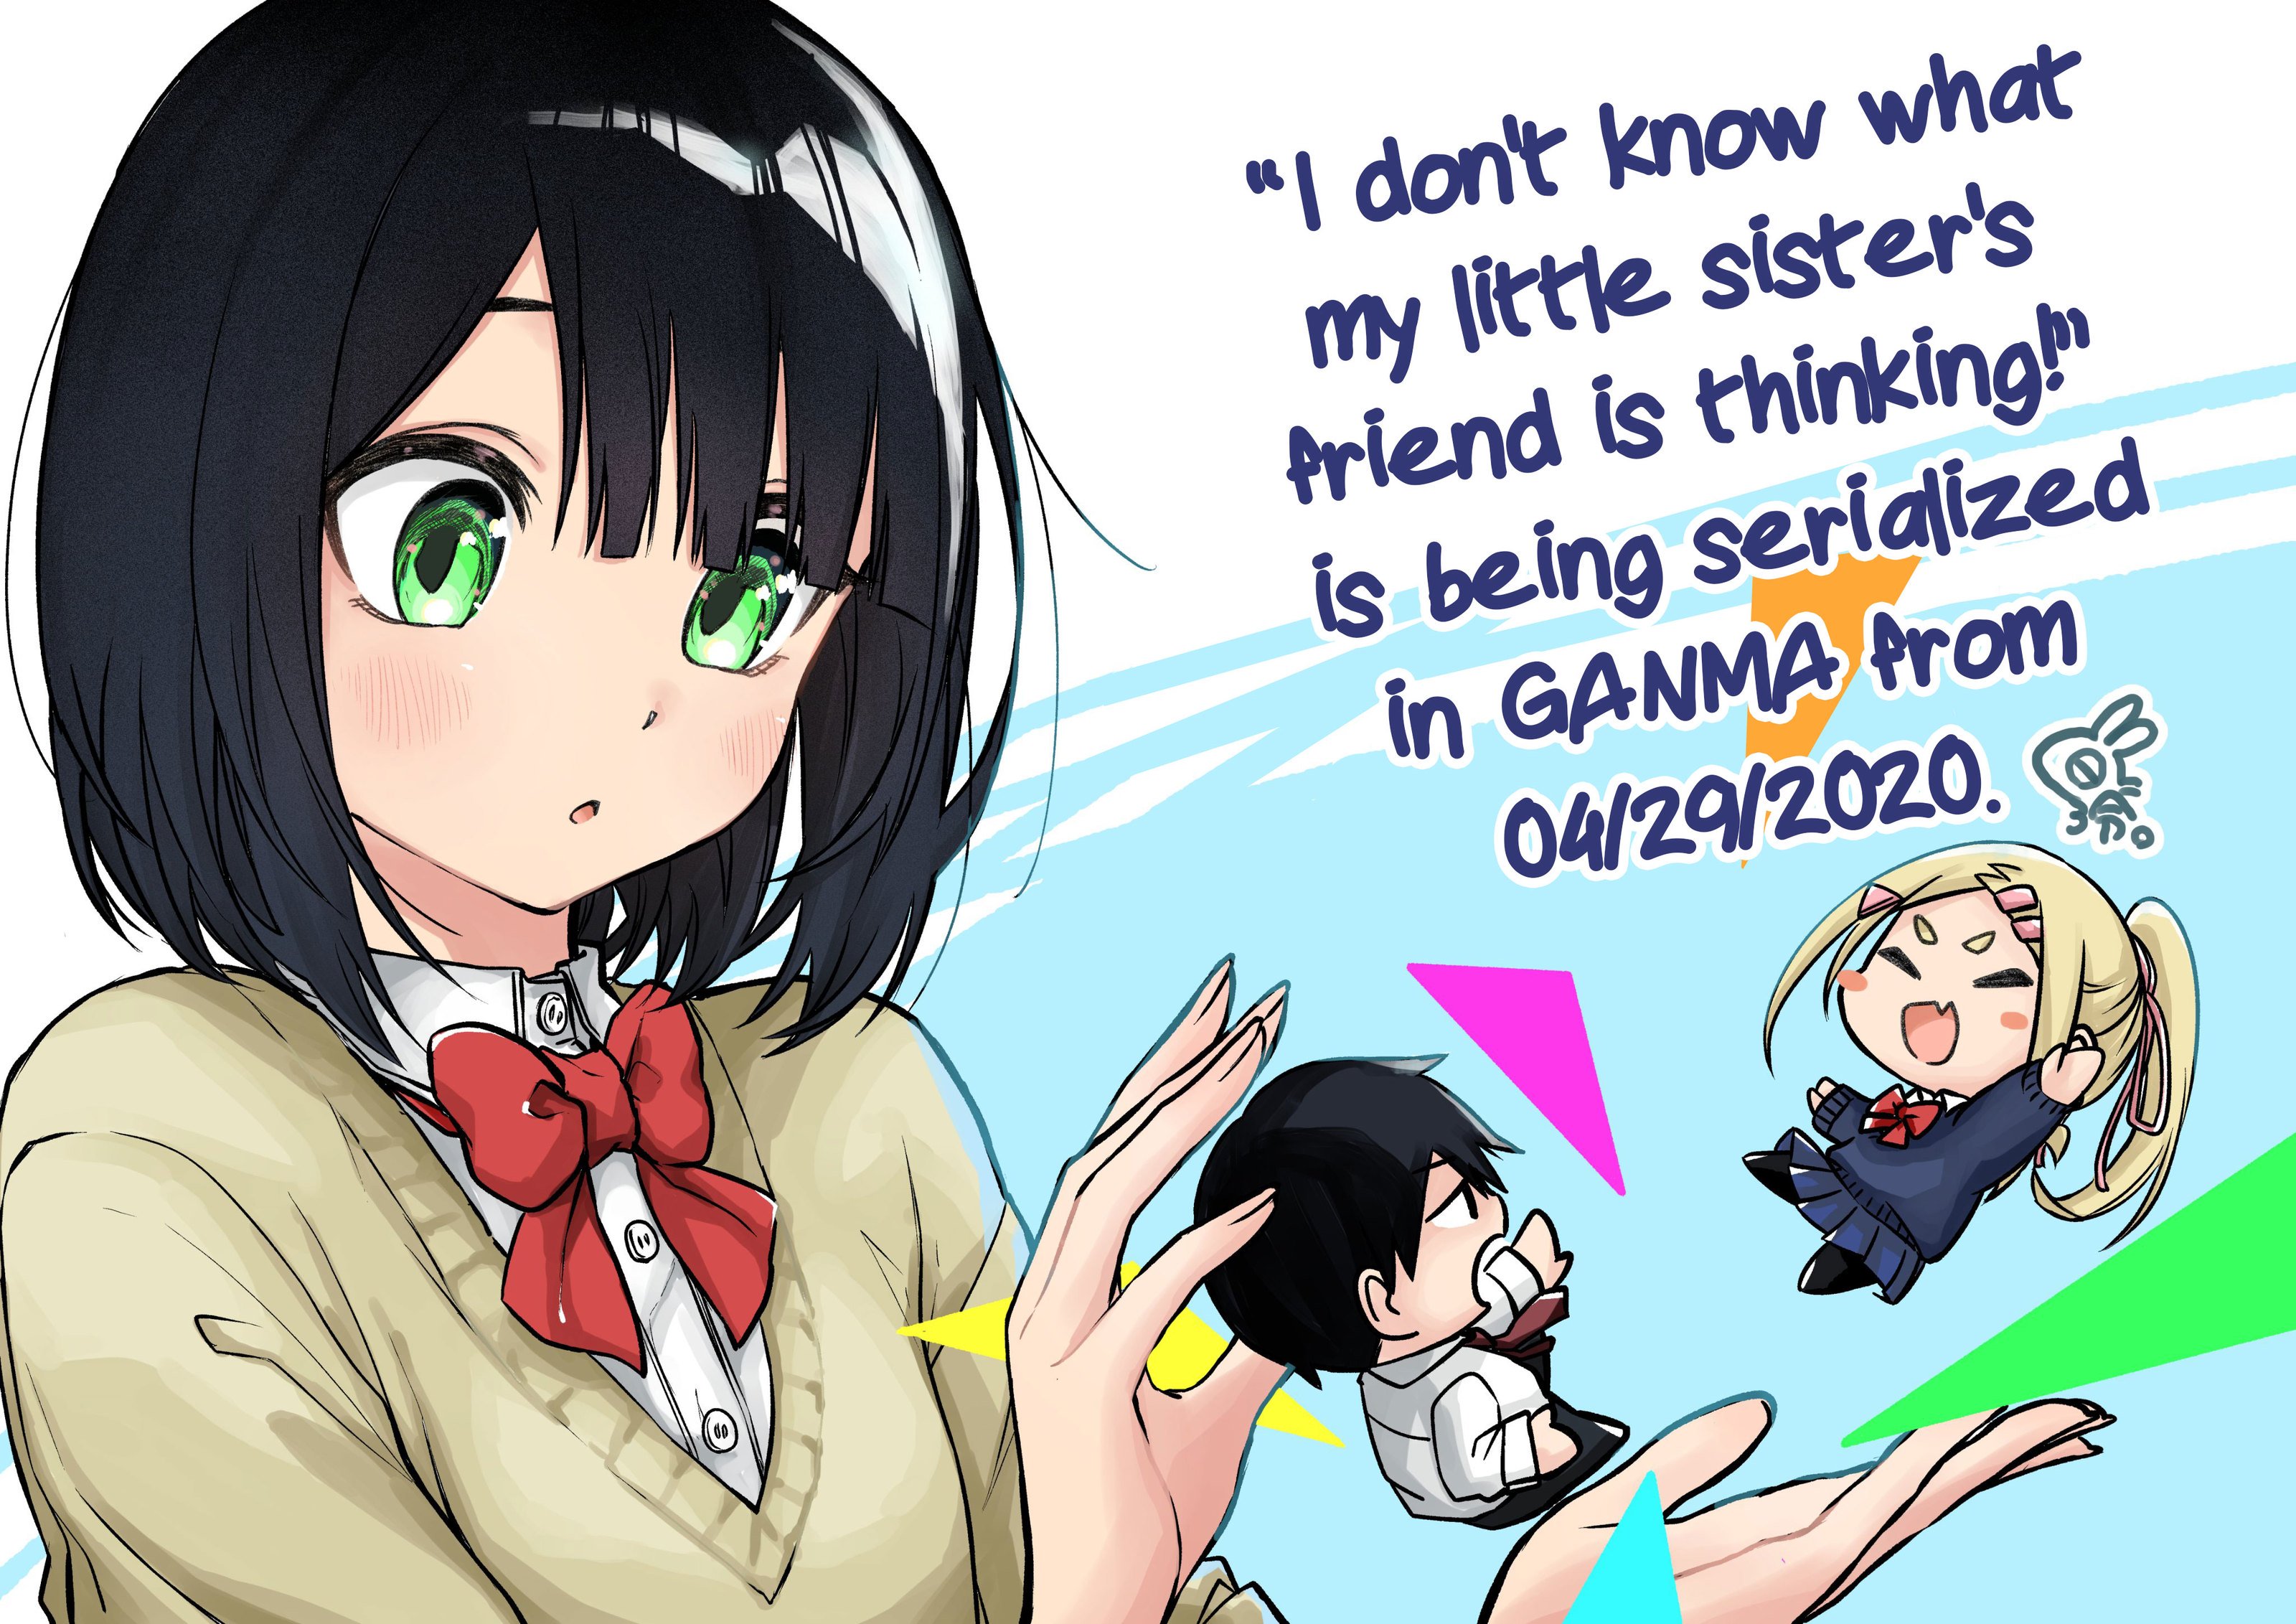 I Don't Know What My Little Sister's Friend Is Thinking! ch.17.3